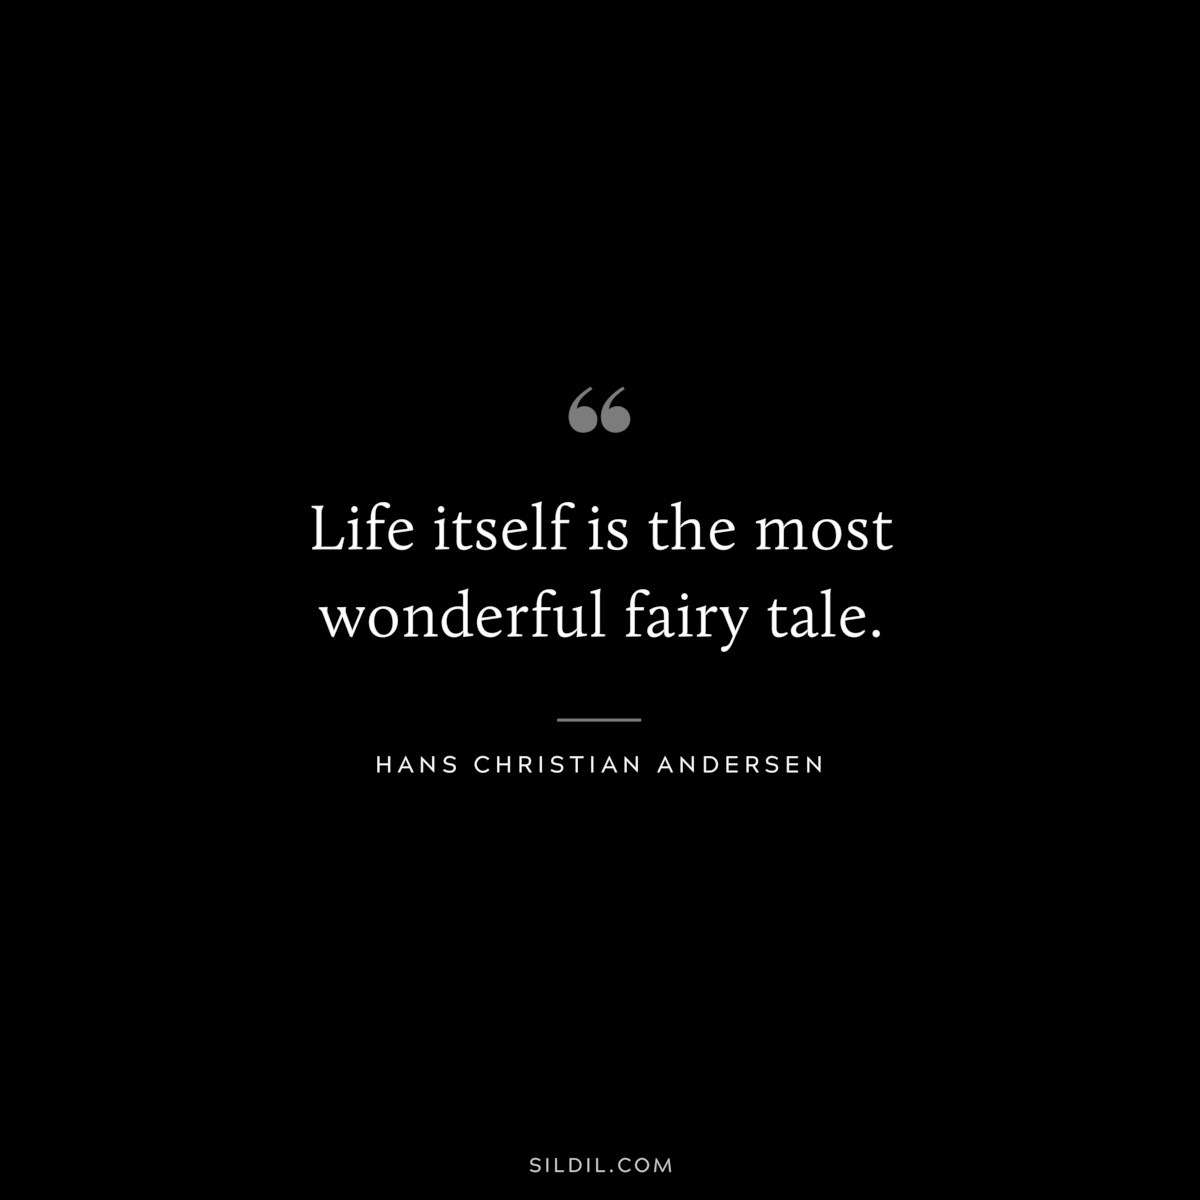 Life itself is the most wonderful fairy tale. ― Hans Christian Andersen